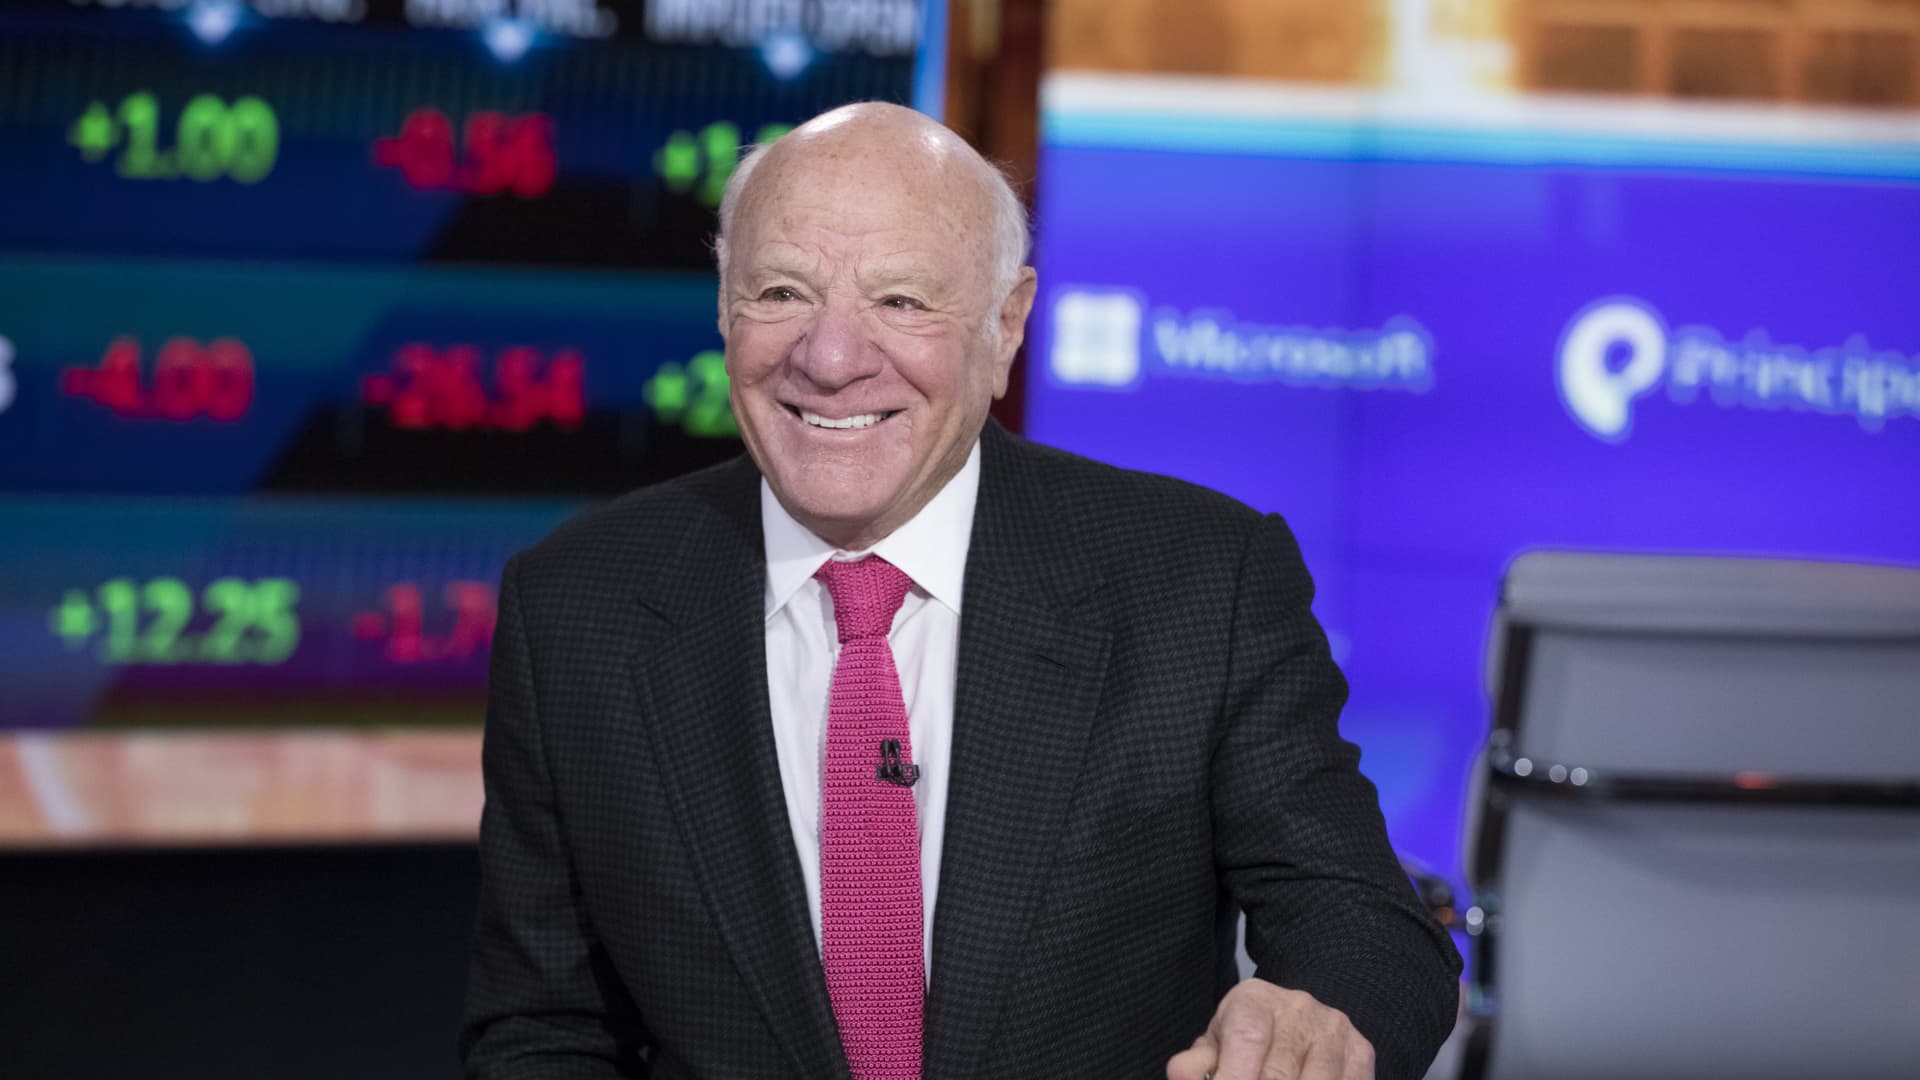 Trump Media is 'a scam' and people buying its stock are 'dopes,' Barry Diller says